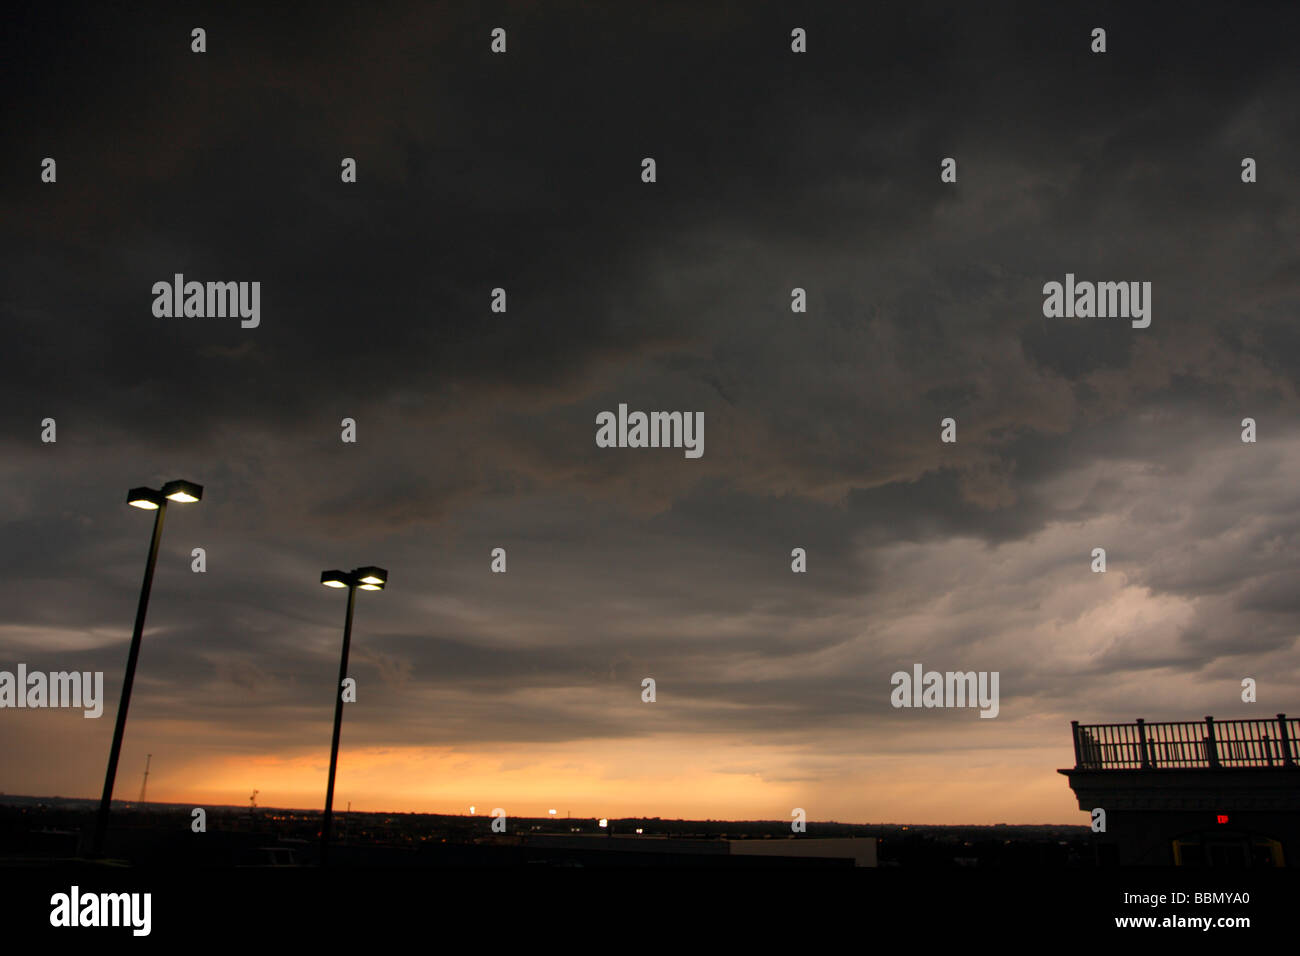 Turbulent thunderstorm skies with lit lighted streetlamps. Stock Photo